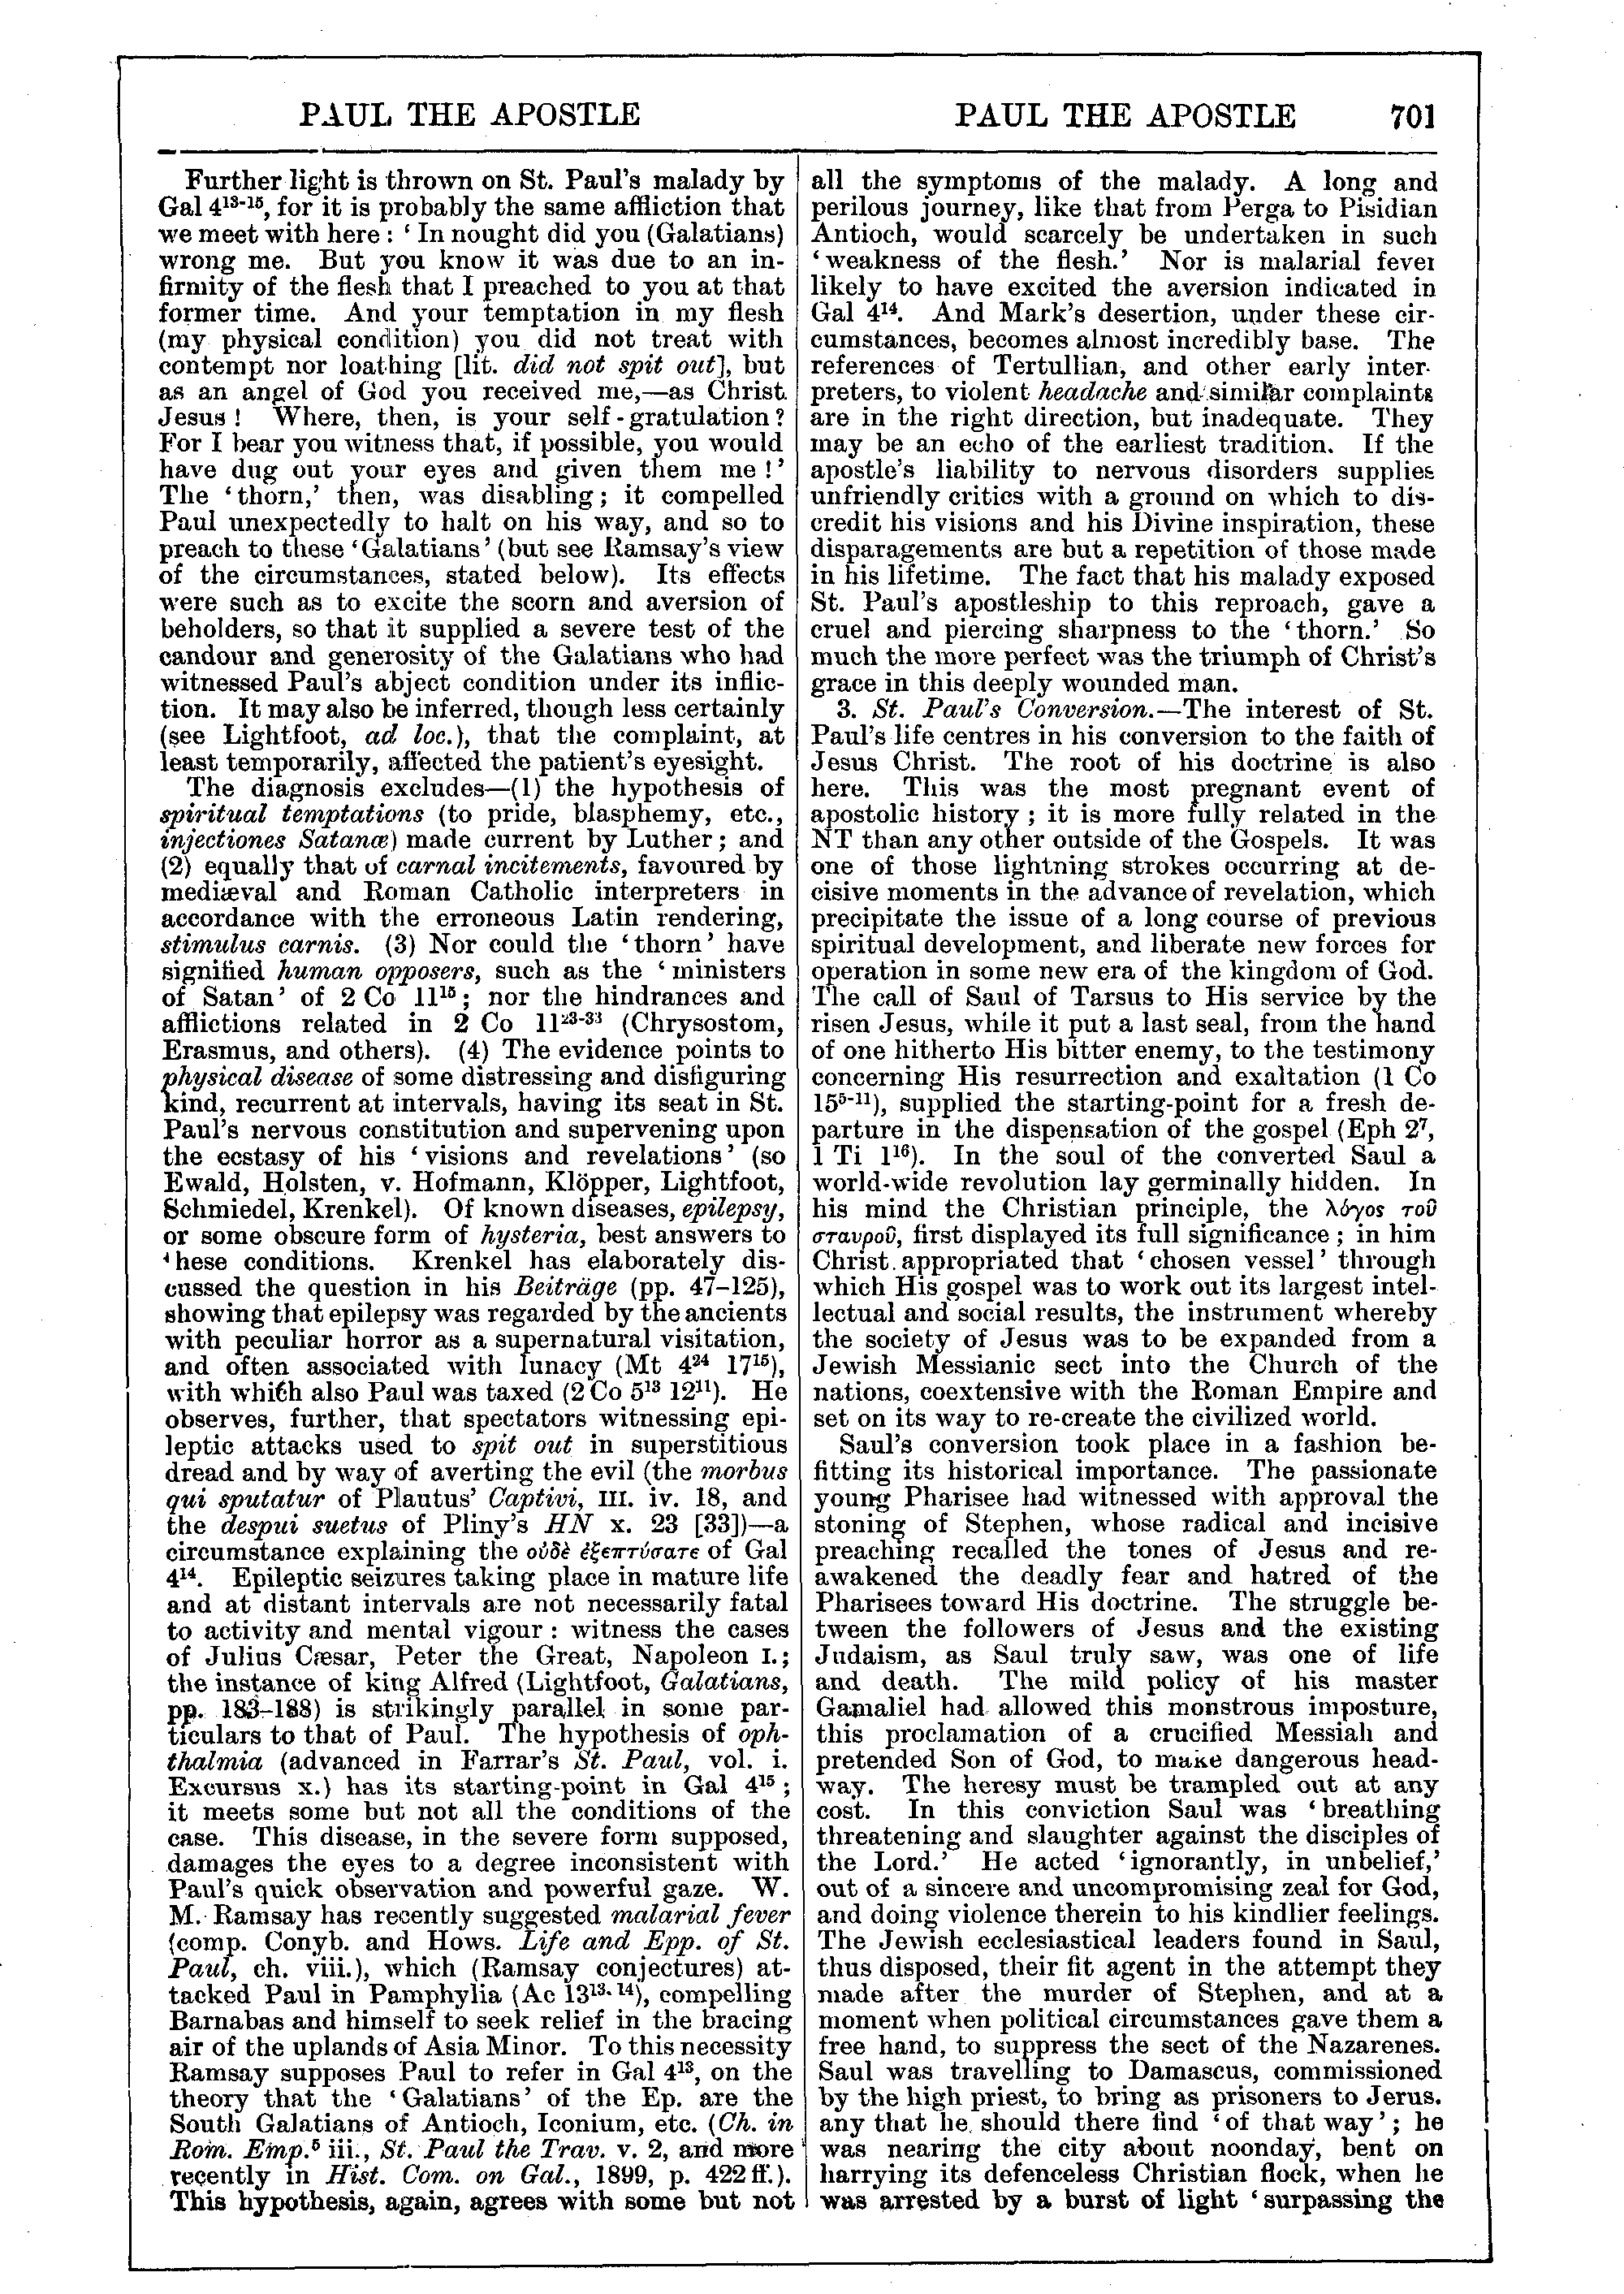 Image of page 701